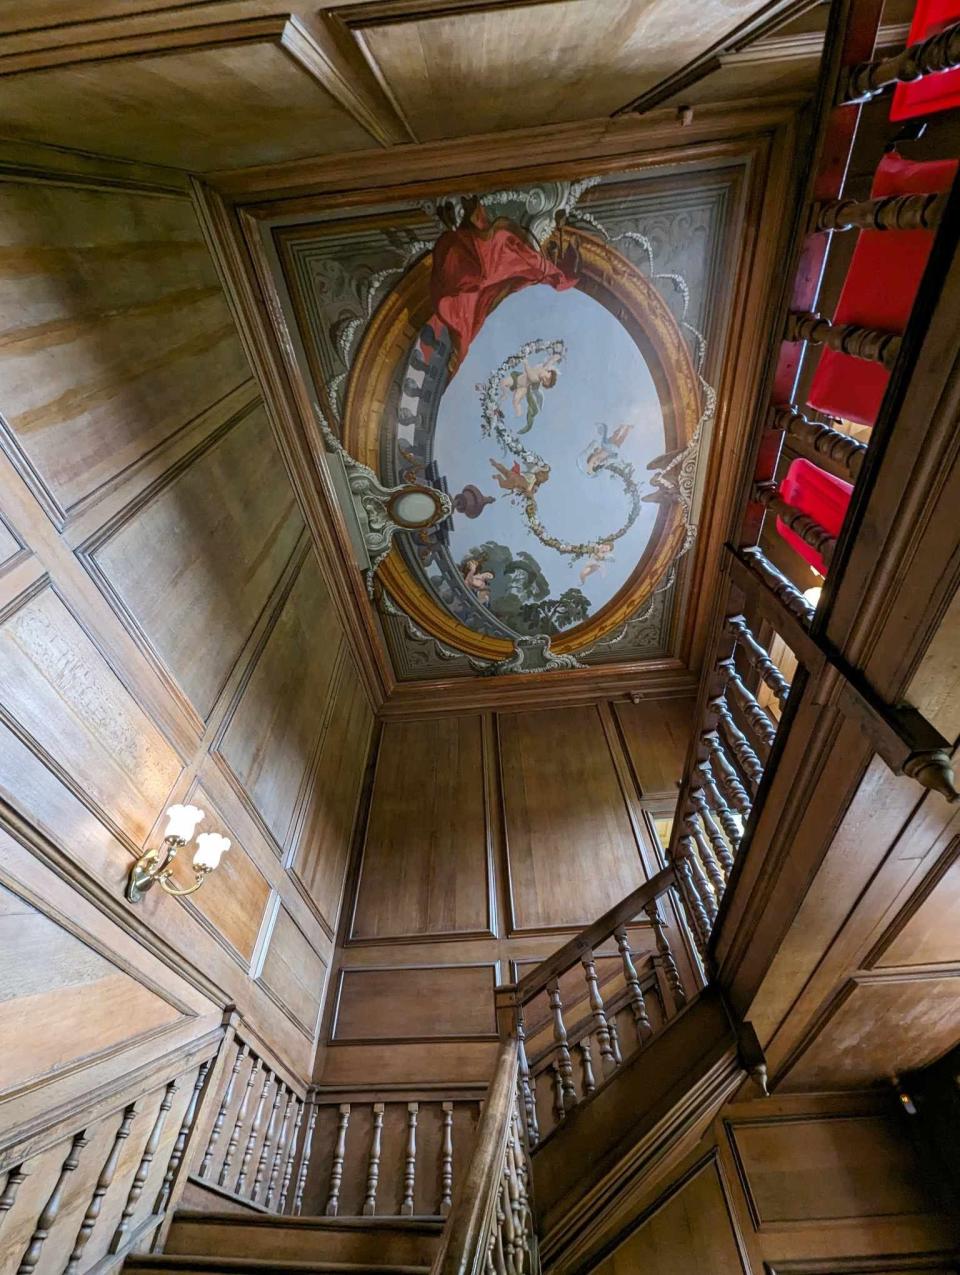 mural on the ceiling at Callendar House